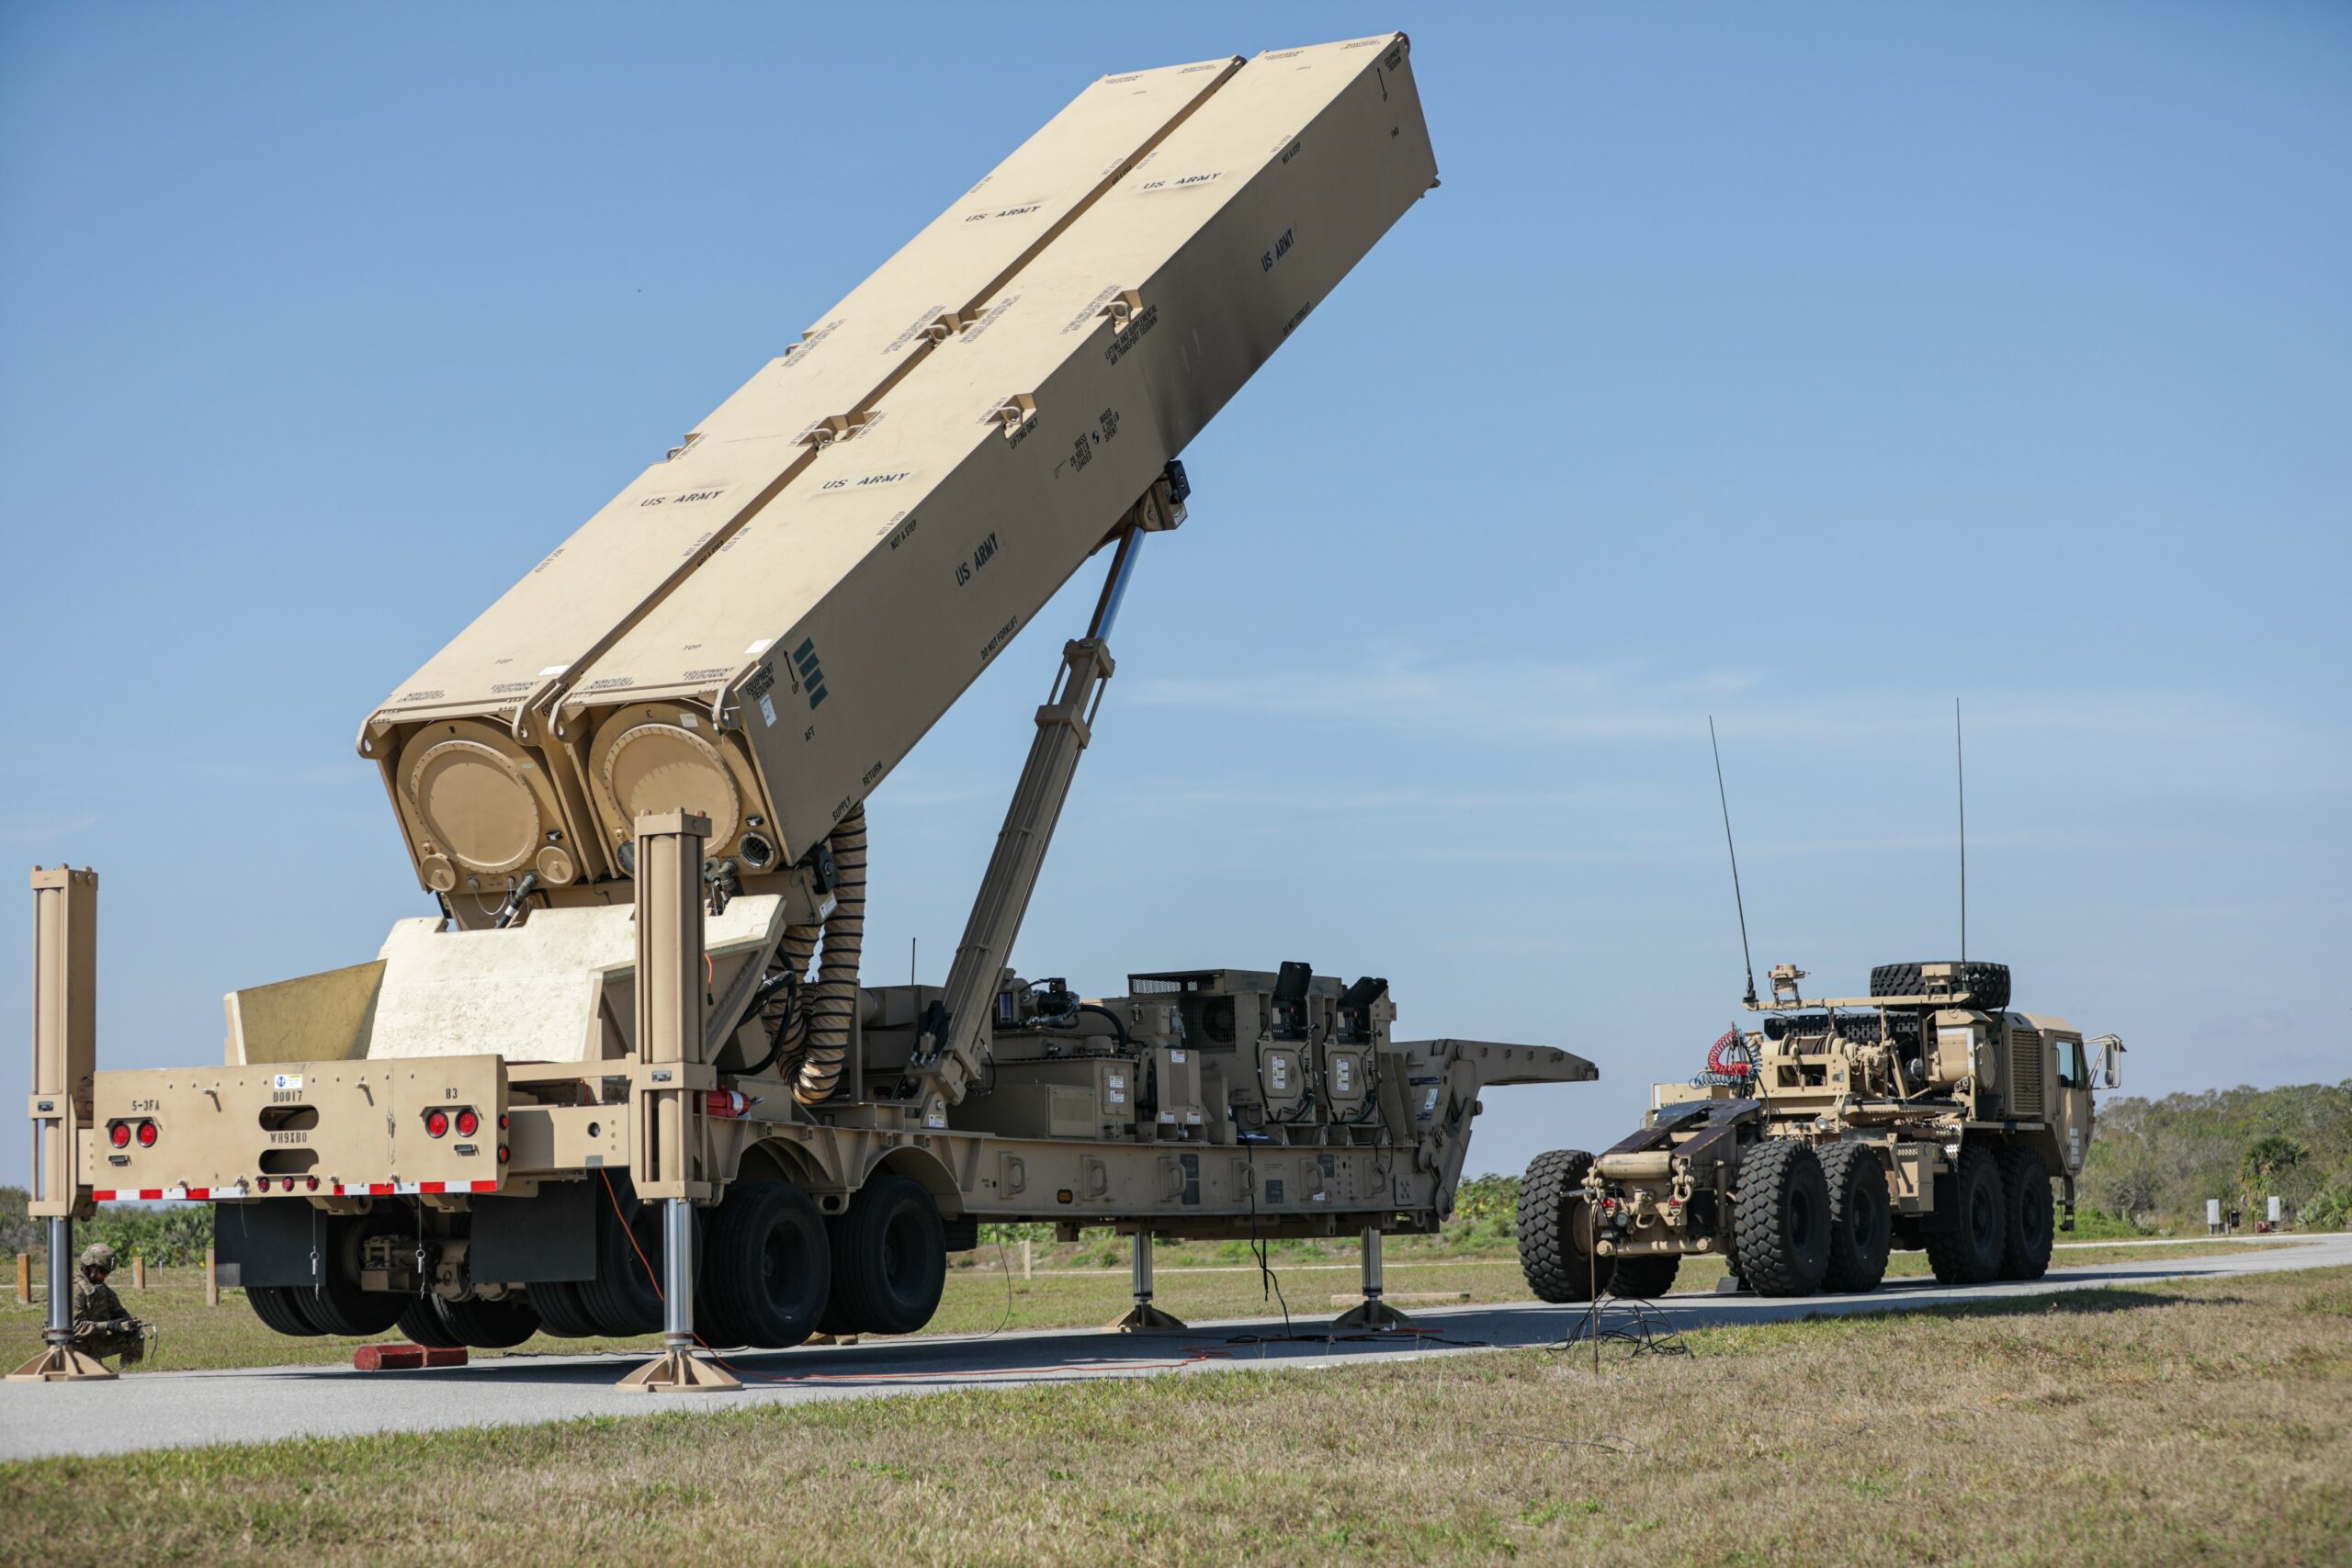 A U.S Army Soldier lifts the hydraulic launching system on the new Long-Range Hypersonic Weapon (LRHW) during Operation Thunderbolt Strike at Cape Canaveral Space Force Station, Florida, March 3, 2023. During the LRHW system development, the Army’s Rapid Capabilities & Critical Technologies Office (RCCTO) implemented a Soldier-centered design concept which uses formal and informal Soldier touch points to obtain early feedback to influence design, speed up development, and ensure an operationally effective weapon system. (Spc. Chandler Coats)